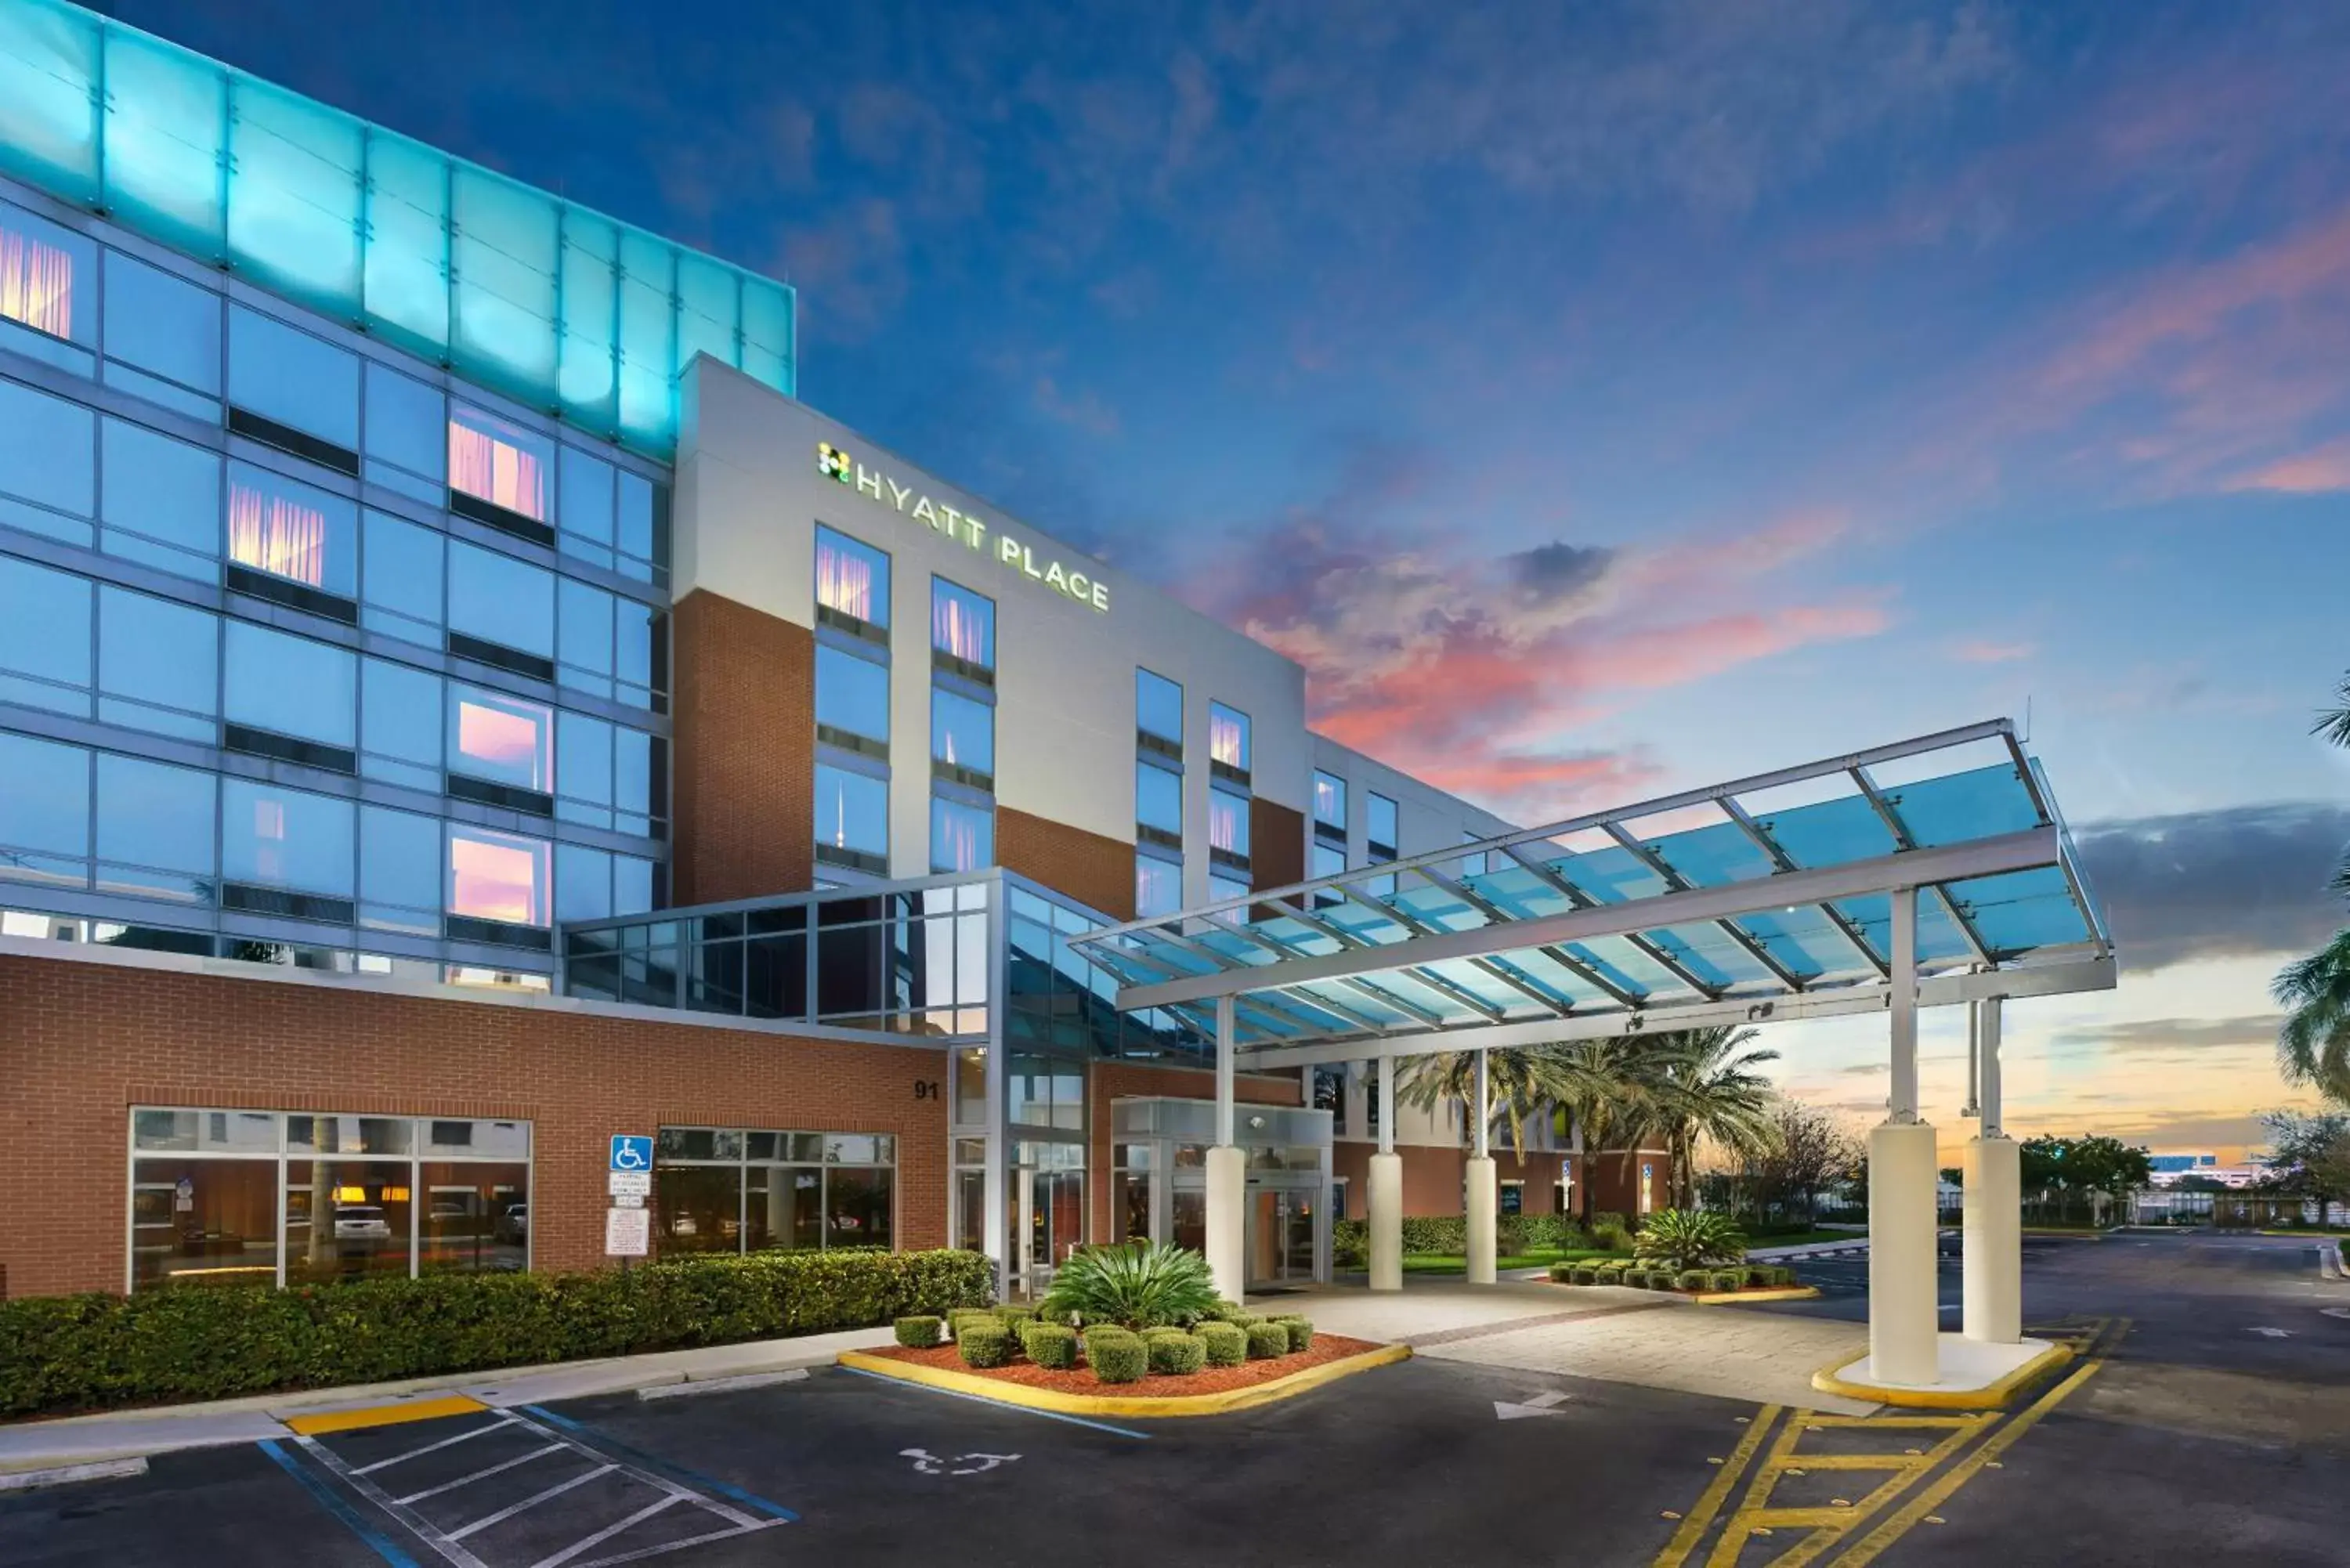 Property Building in Hyatt Place Fort Lauderdale Airport/Cruise Port